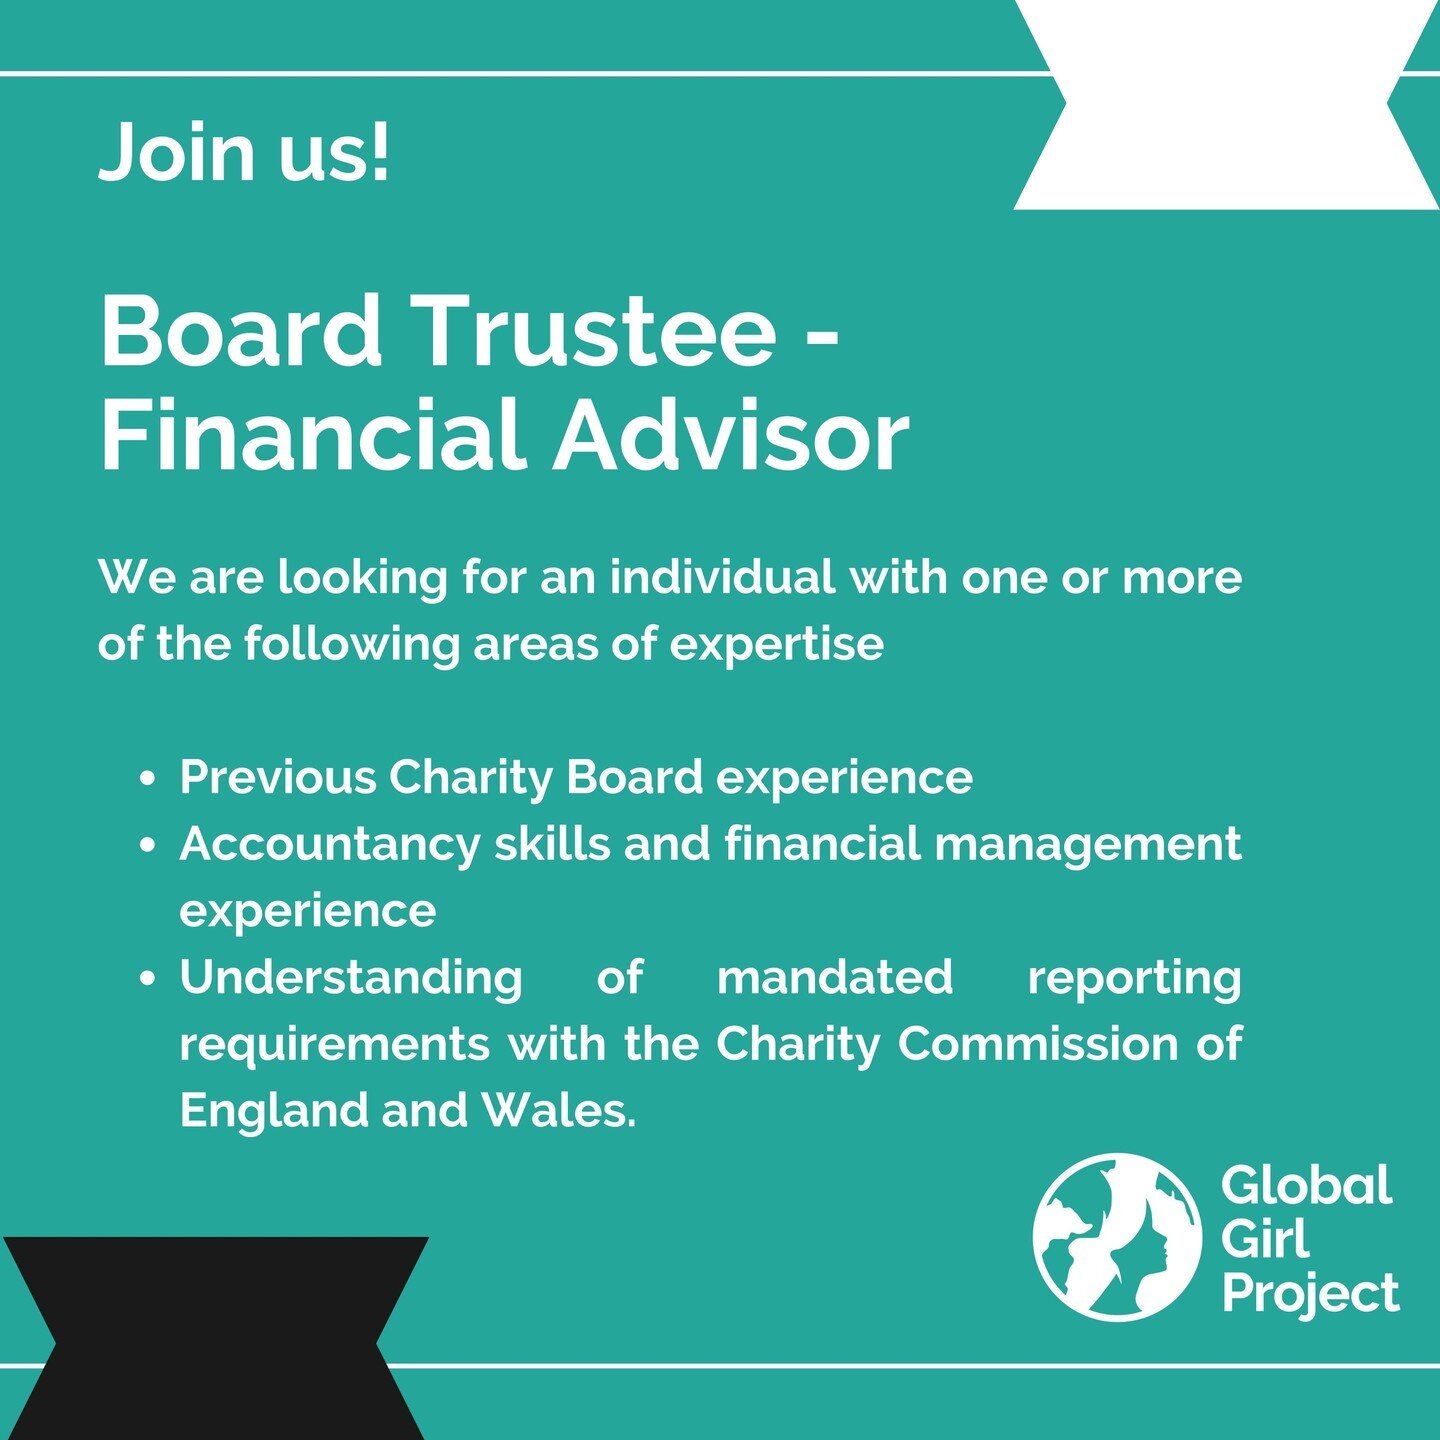 Have you been looking for a board role? Join our international charity as the Financial Advisor.

For more information on the role and the application process, head to the link in our bio to take a look at our JD.

#GlobalGirlProject #BoardRole #Soci